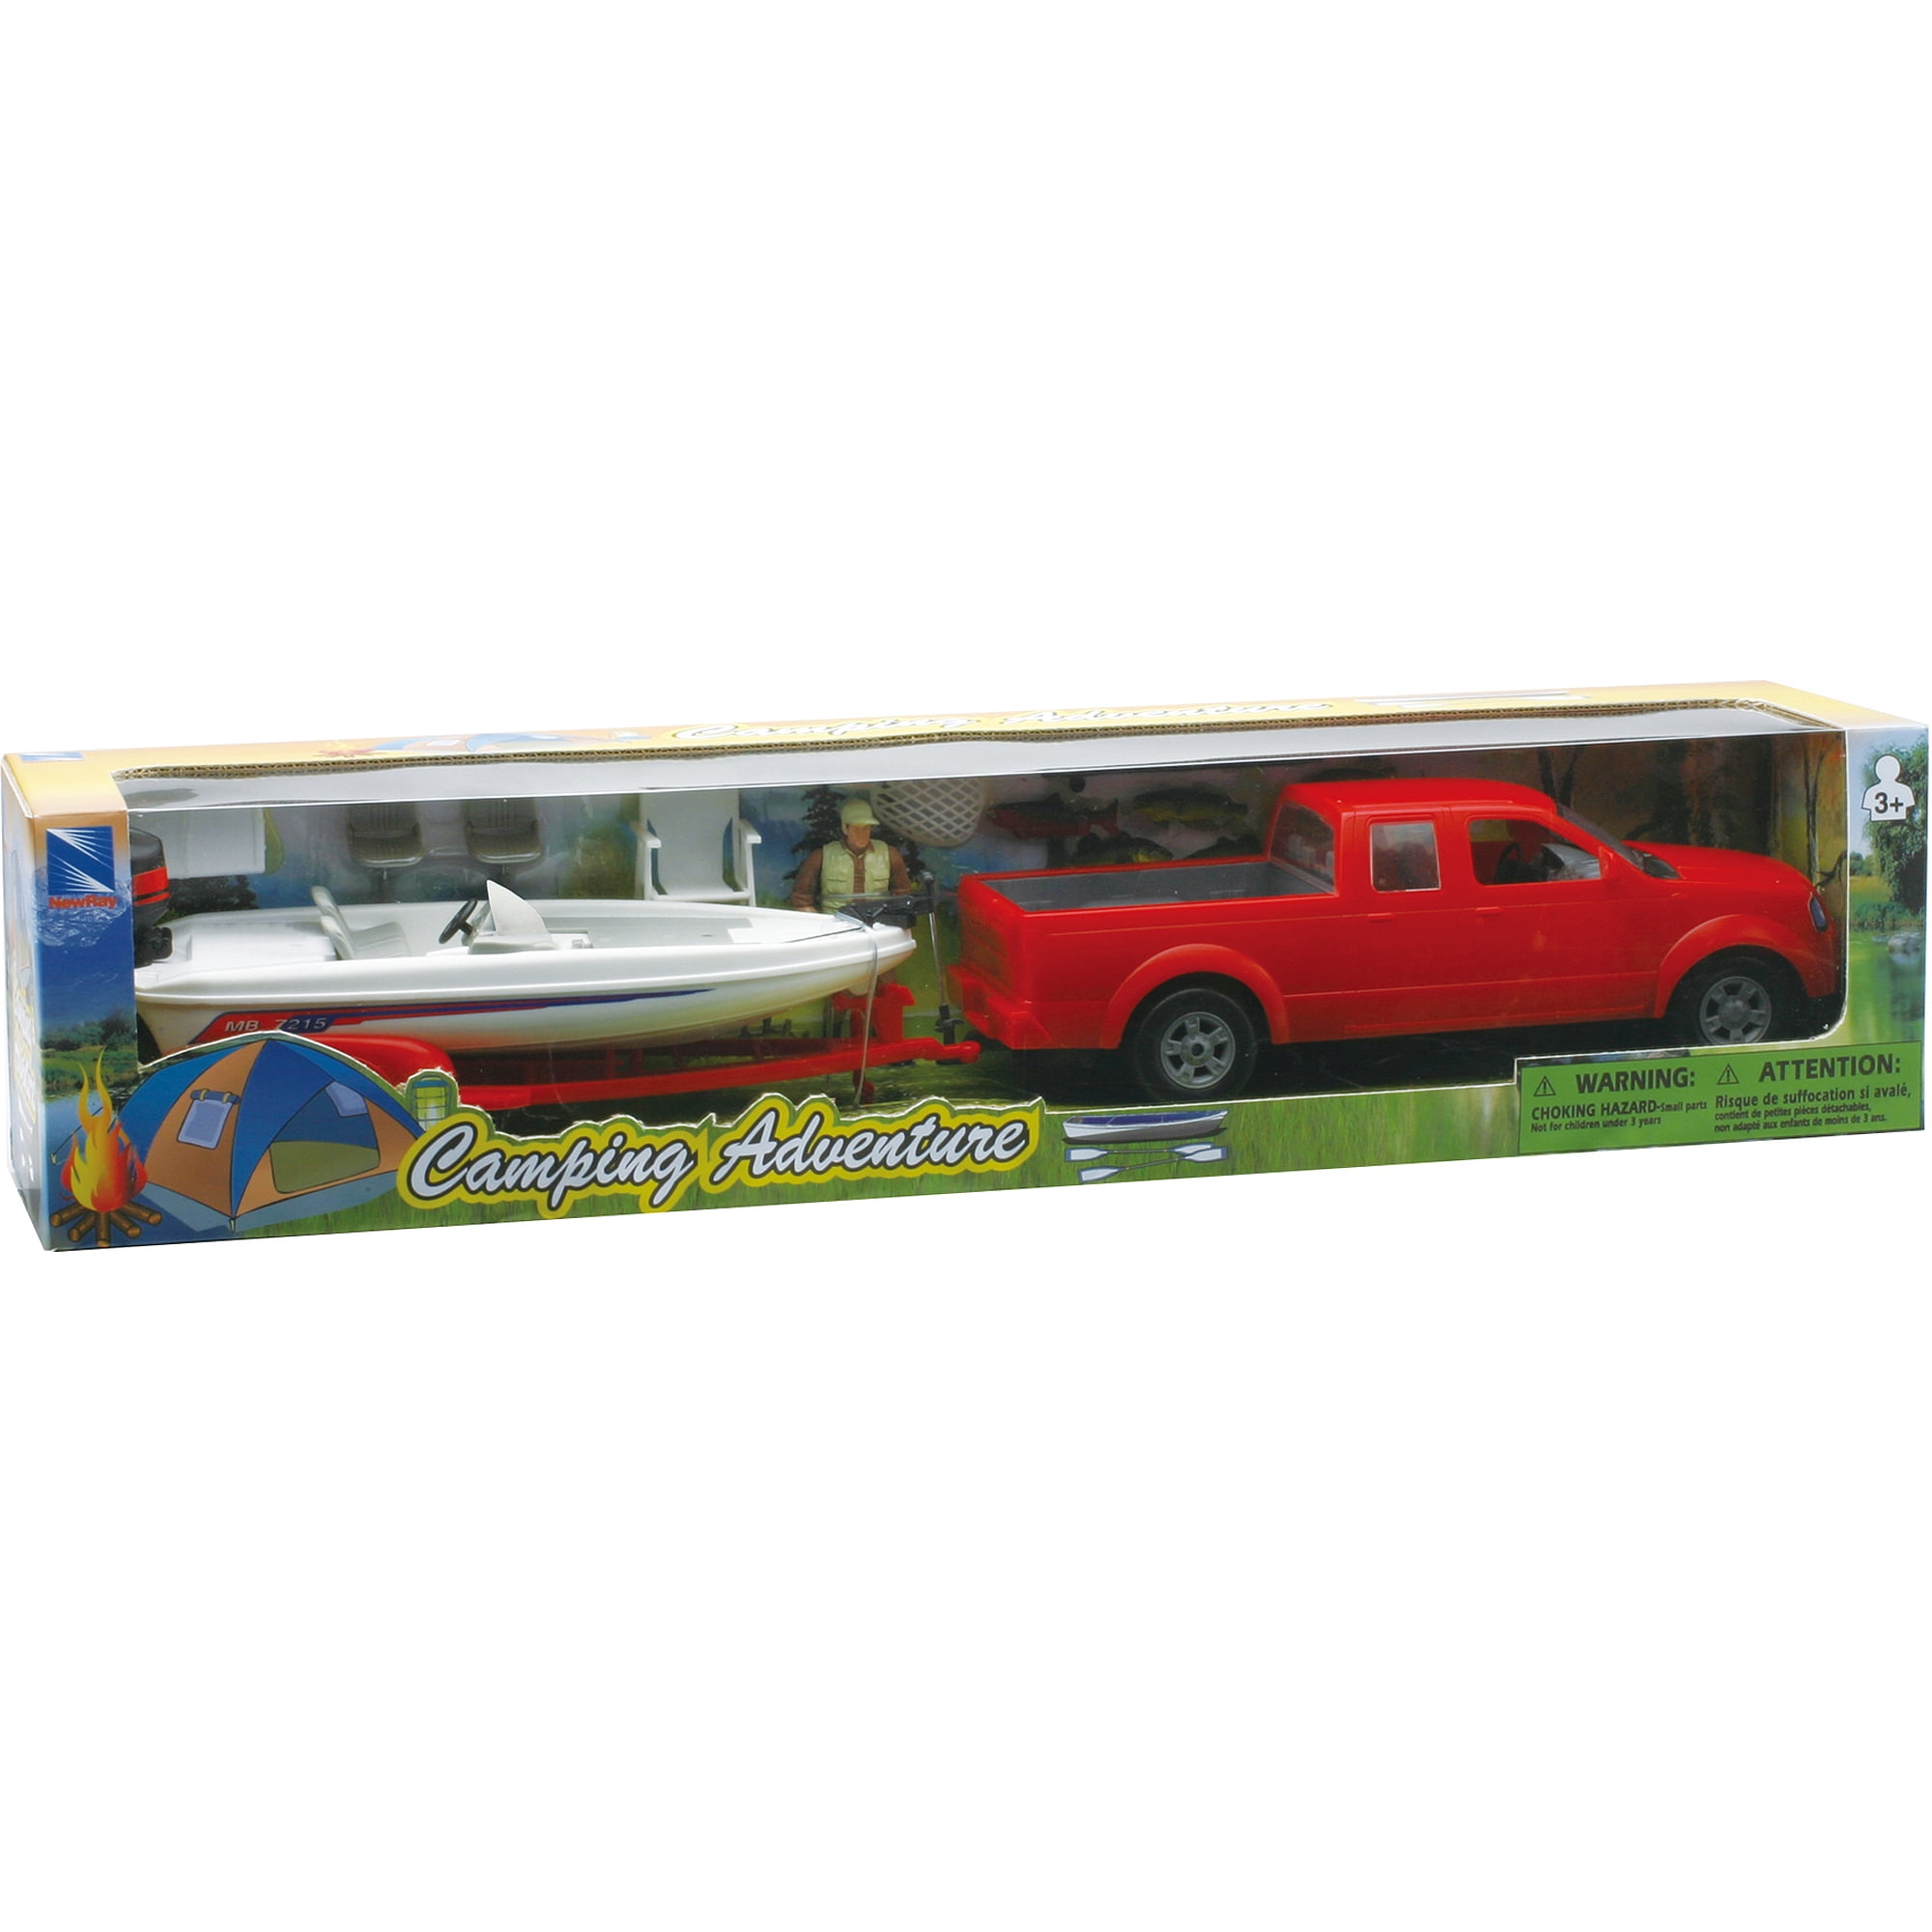 toy truck and boat trailer set